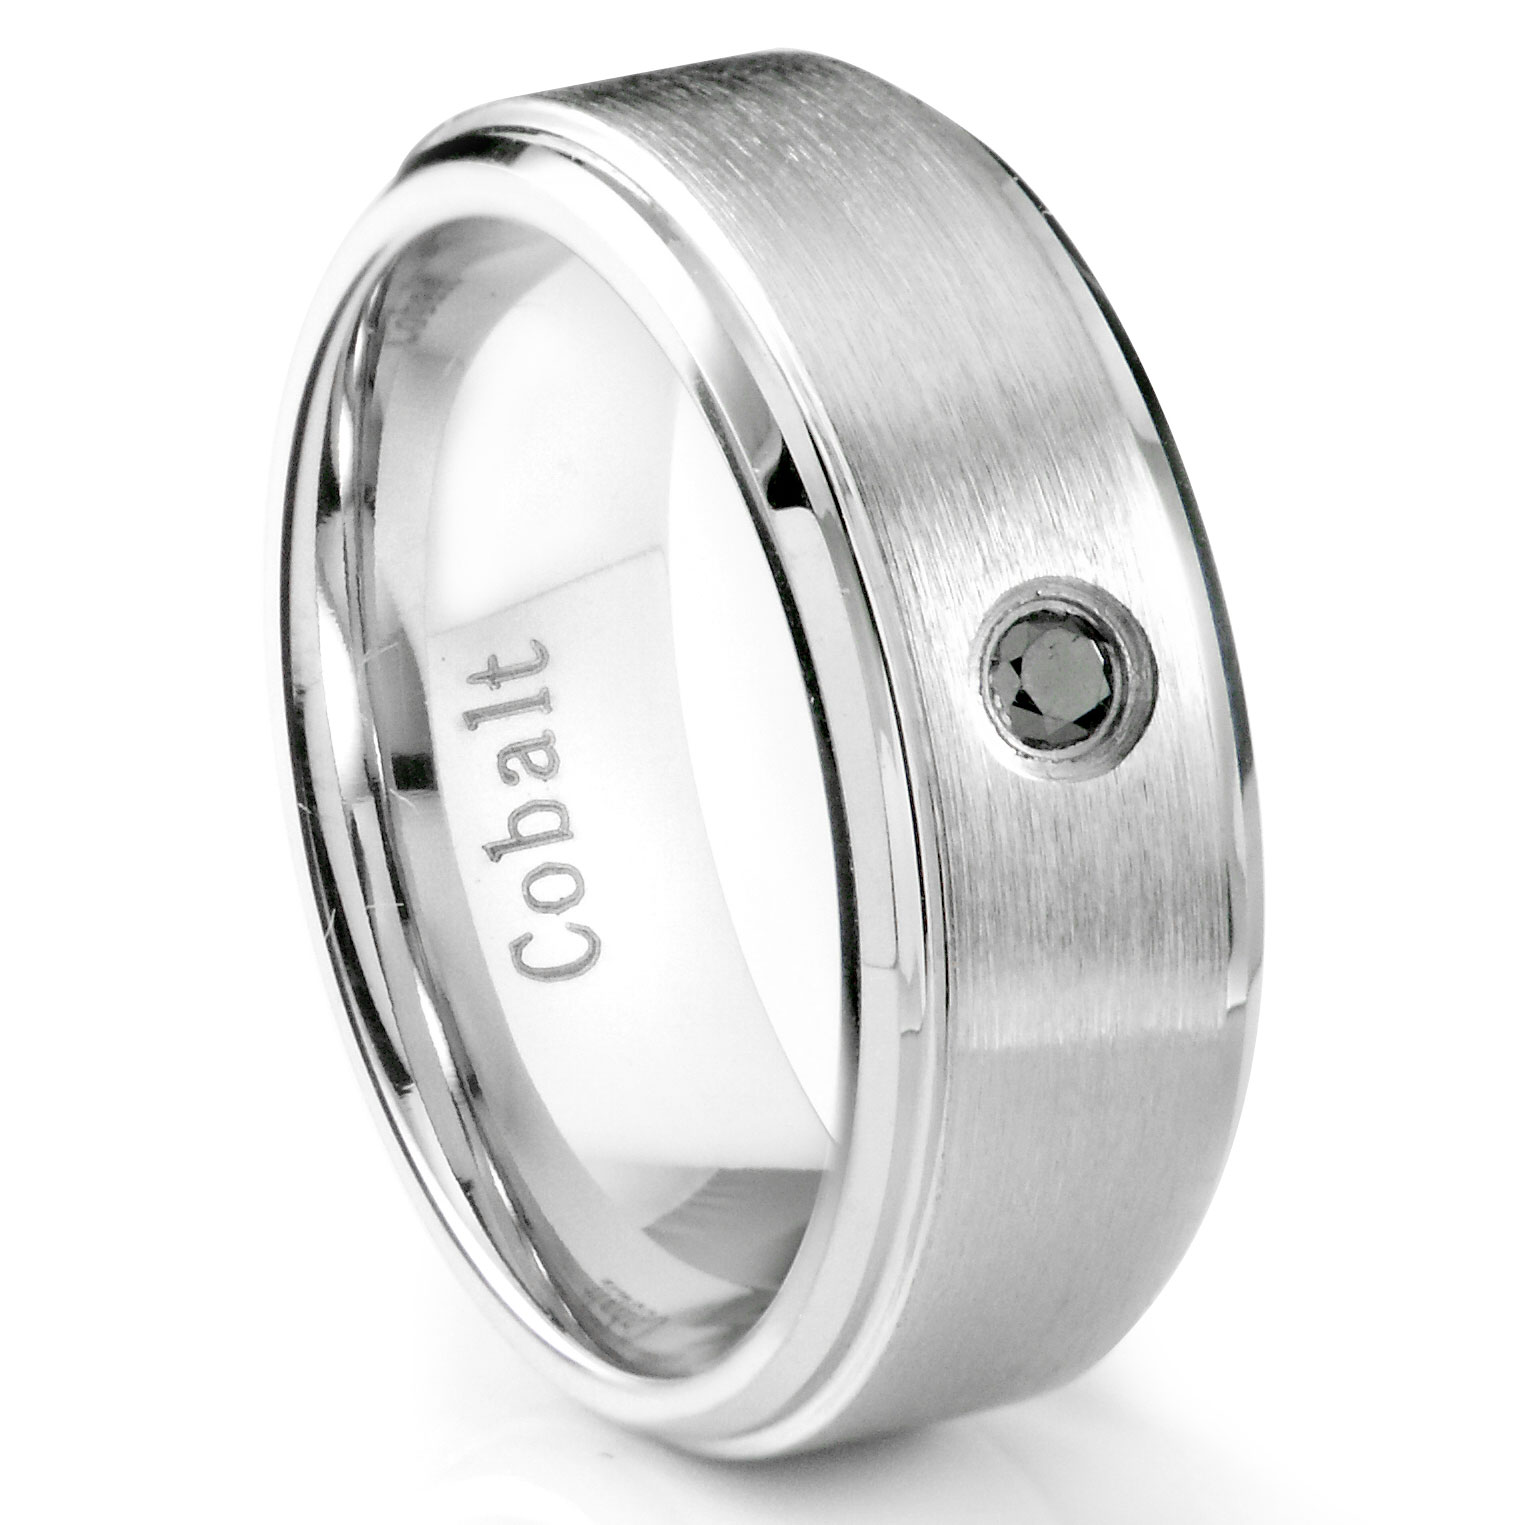 Men Cobalt Chrome Wedding Band Dome Step Edges Ring 8mm Size 7.5 to 14.5 